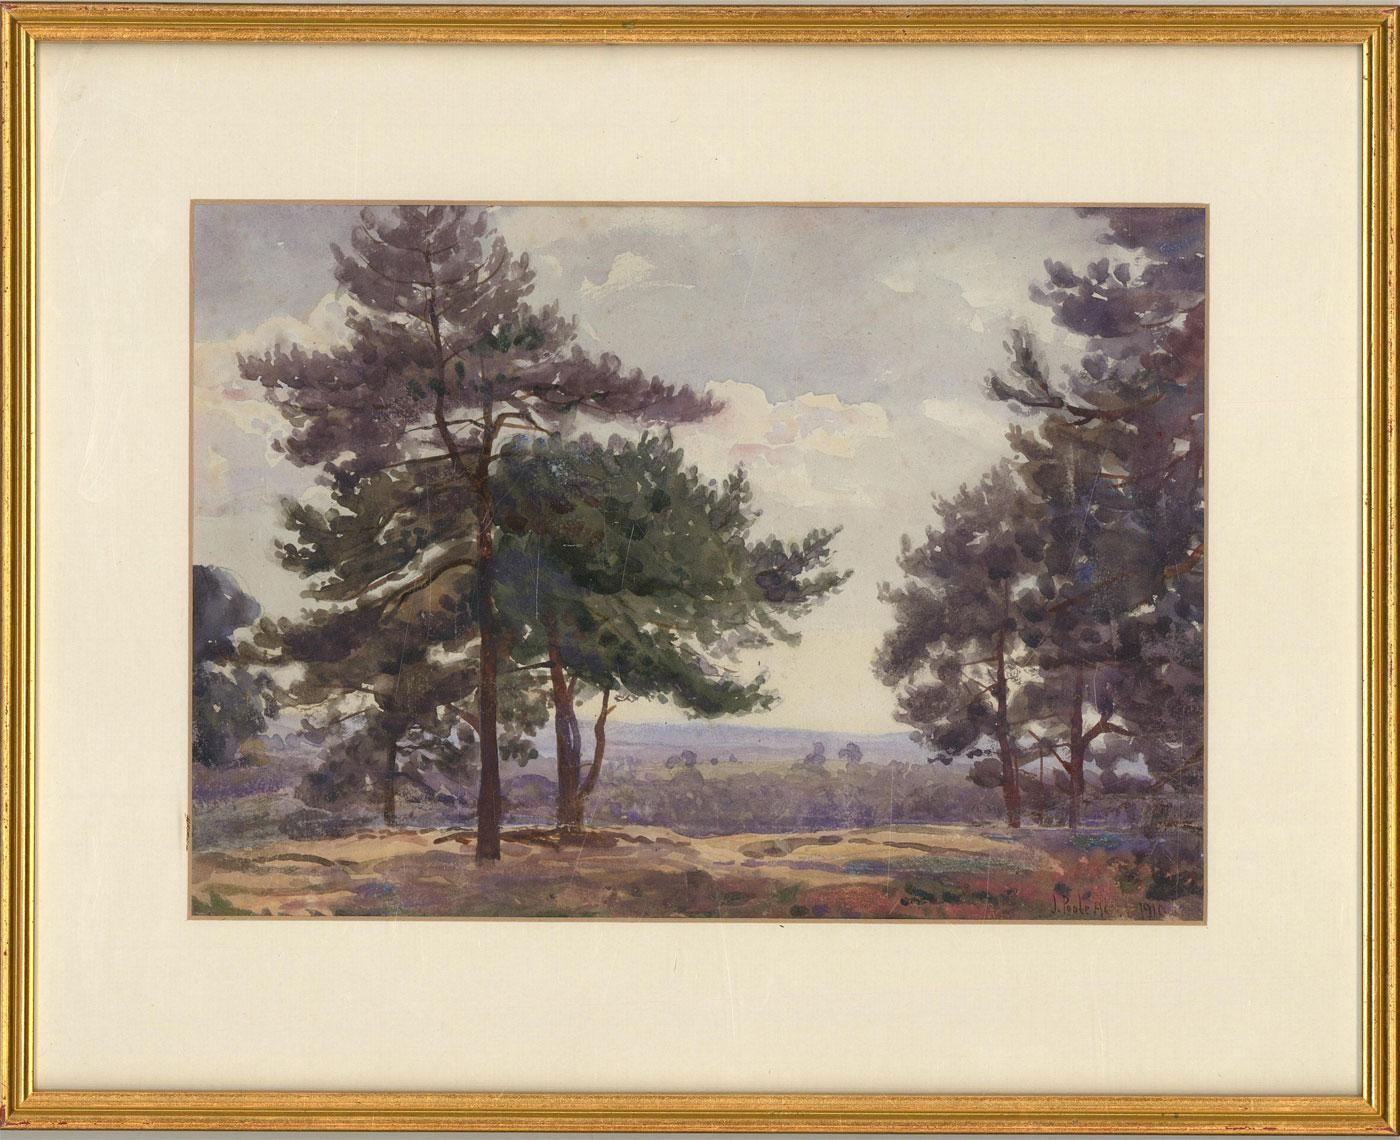 A captivating watercolour painting by well-listed Irish artist Joseph Poole Addey. The scene depicts a landscape view with several trees at Oxshott Heath, Surrey. Signed and dated to the lower right-hand corner. Well-presented in a white card mount